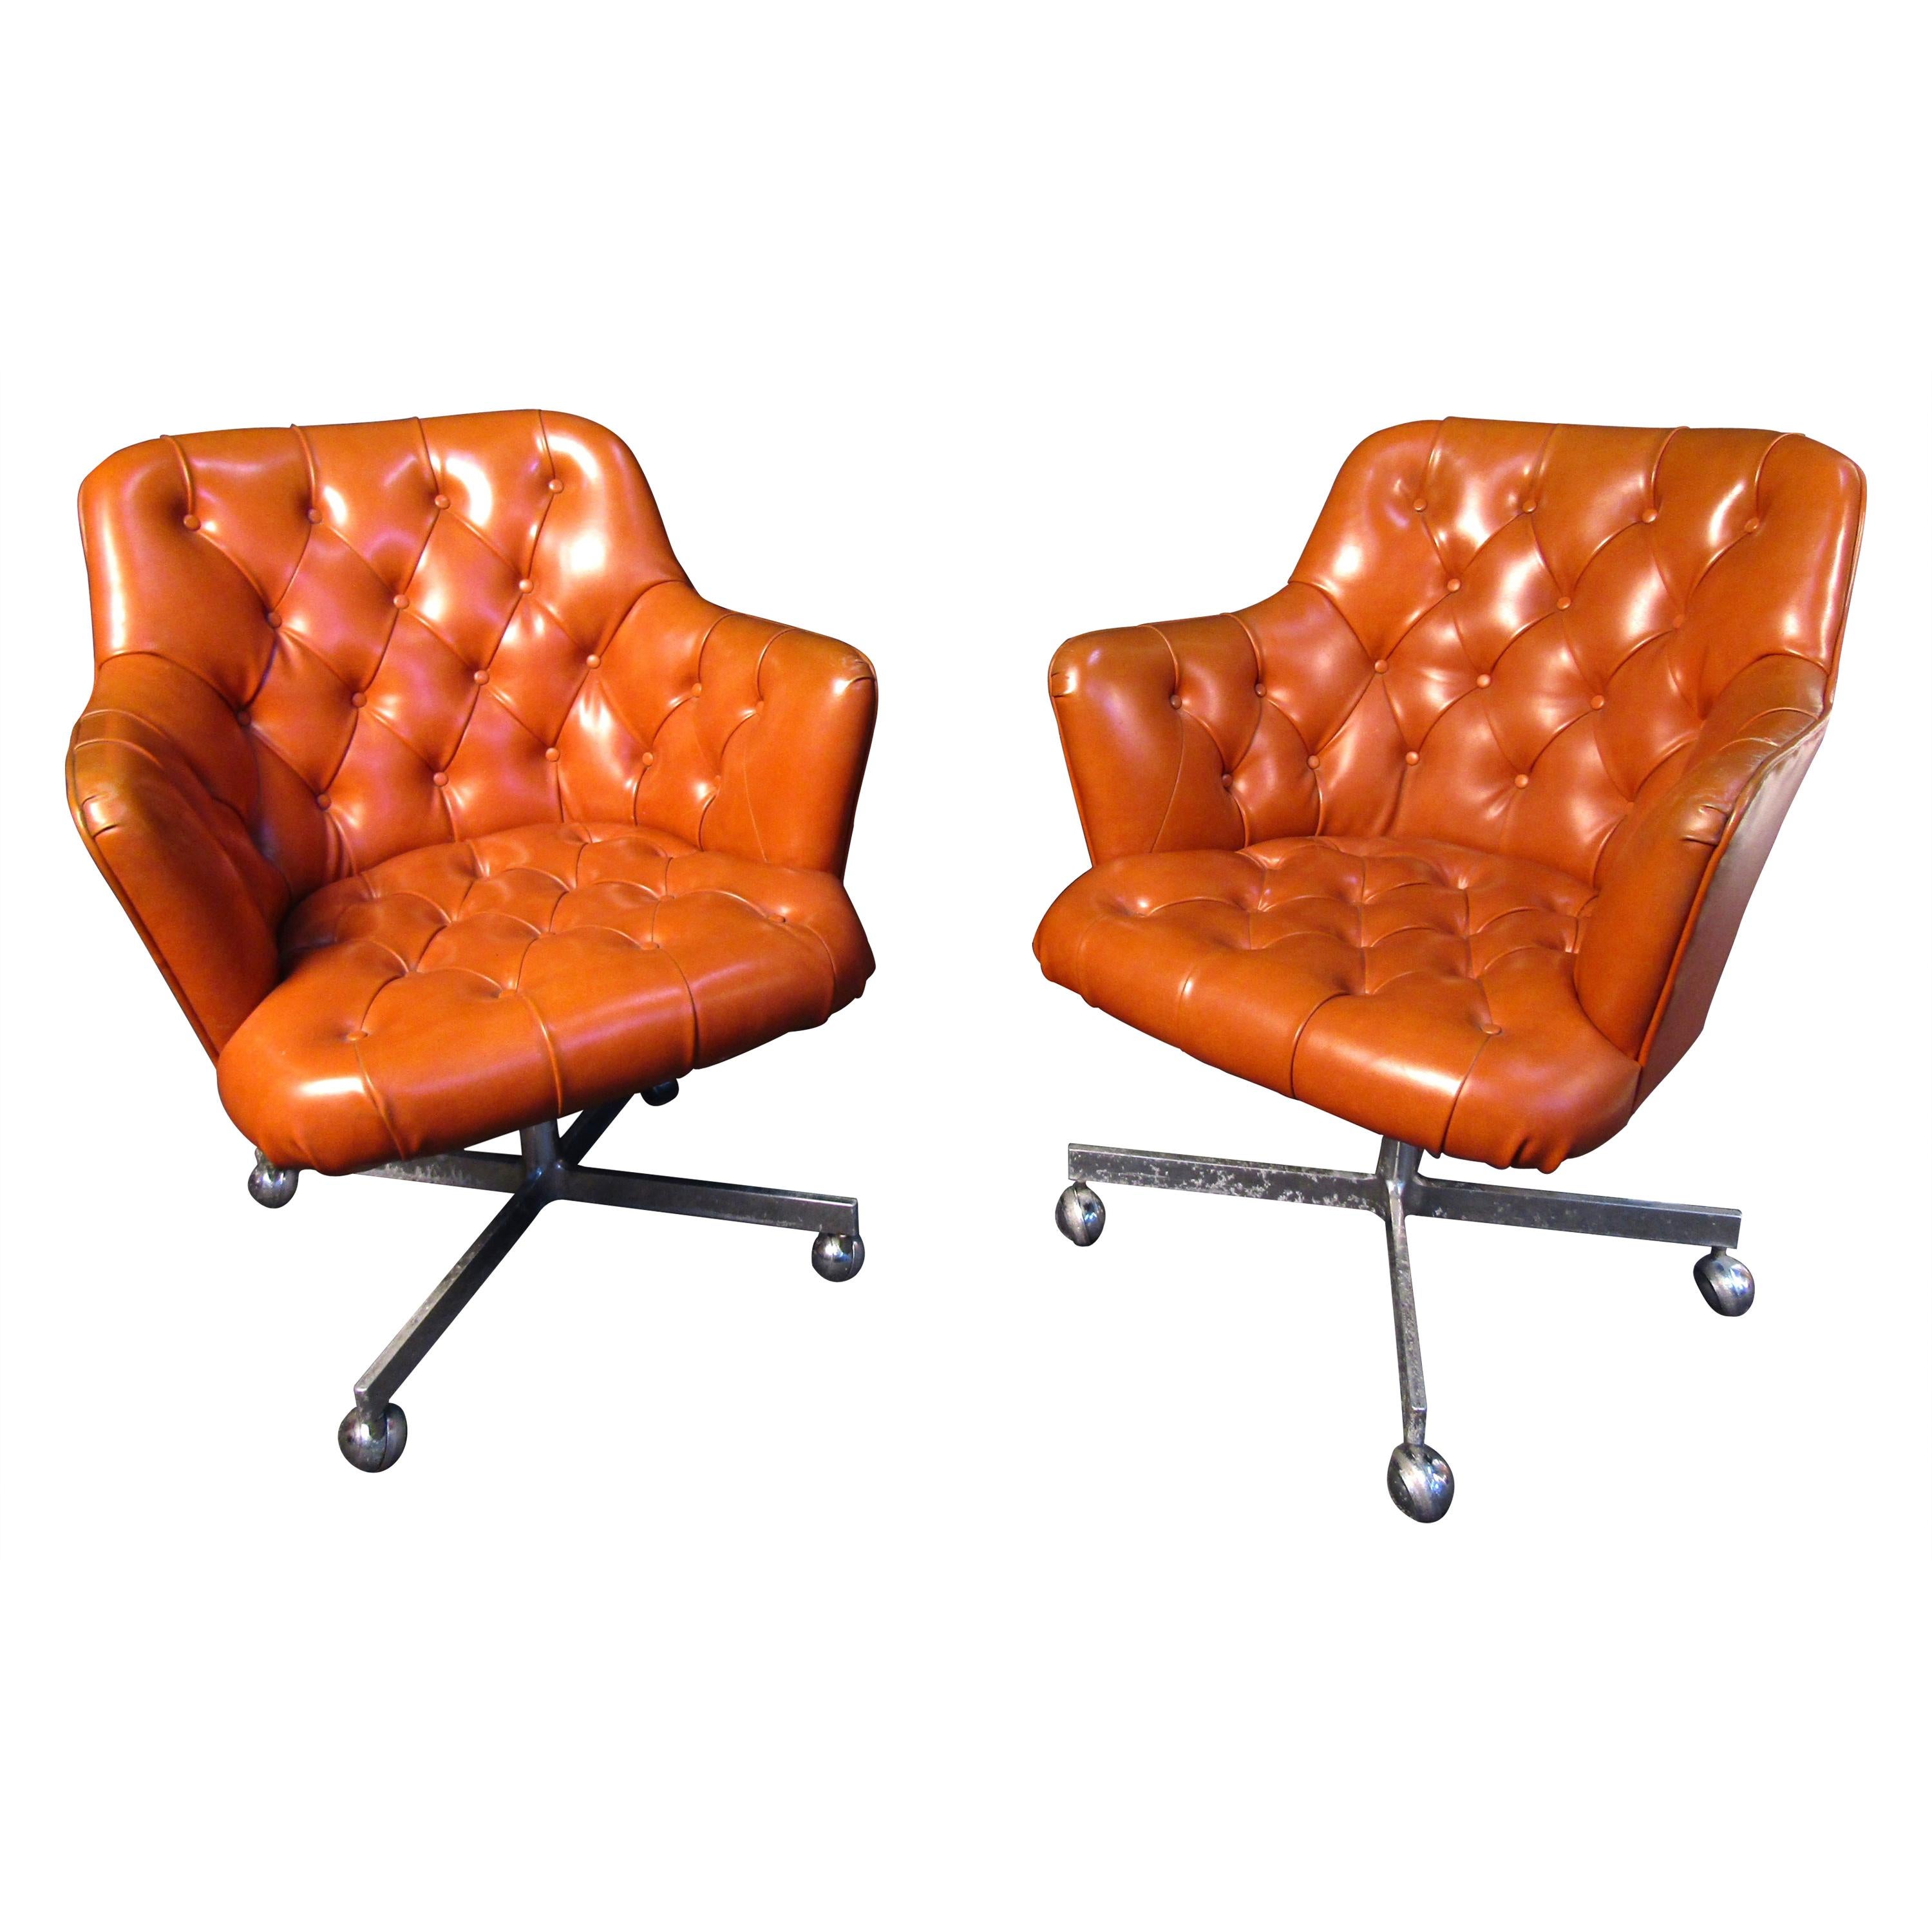 Pair of Mid-Century Modern Leather and Chrome Rolling Armchairs For Sale